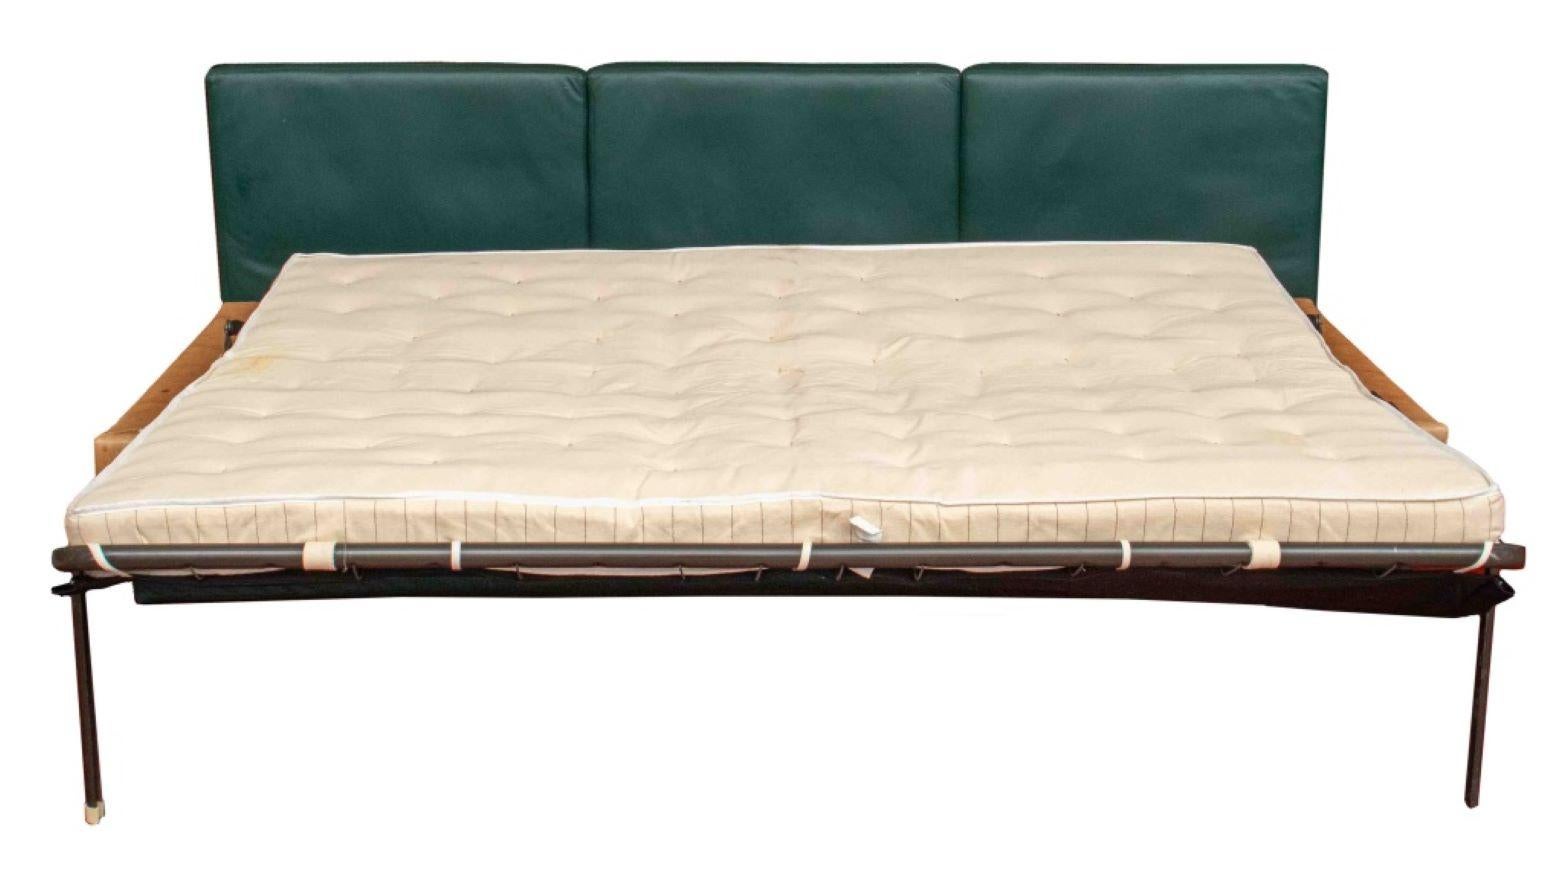 20th Century Modern Leather Sleeper Sectional Sofa For Sale